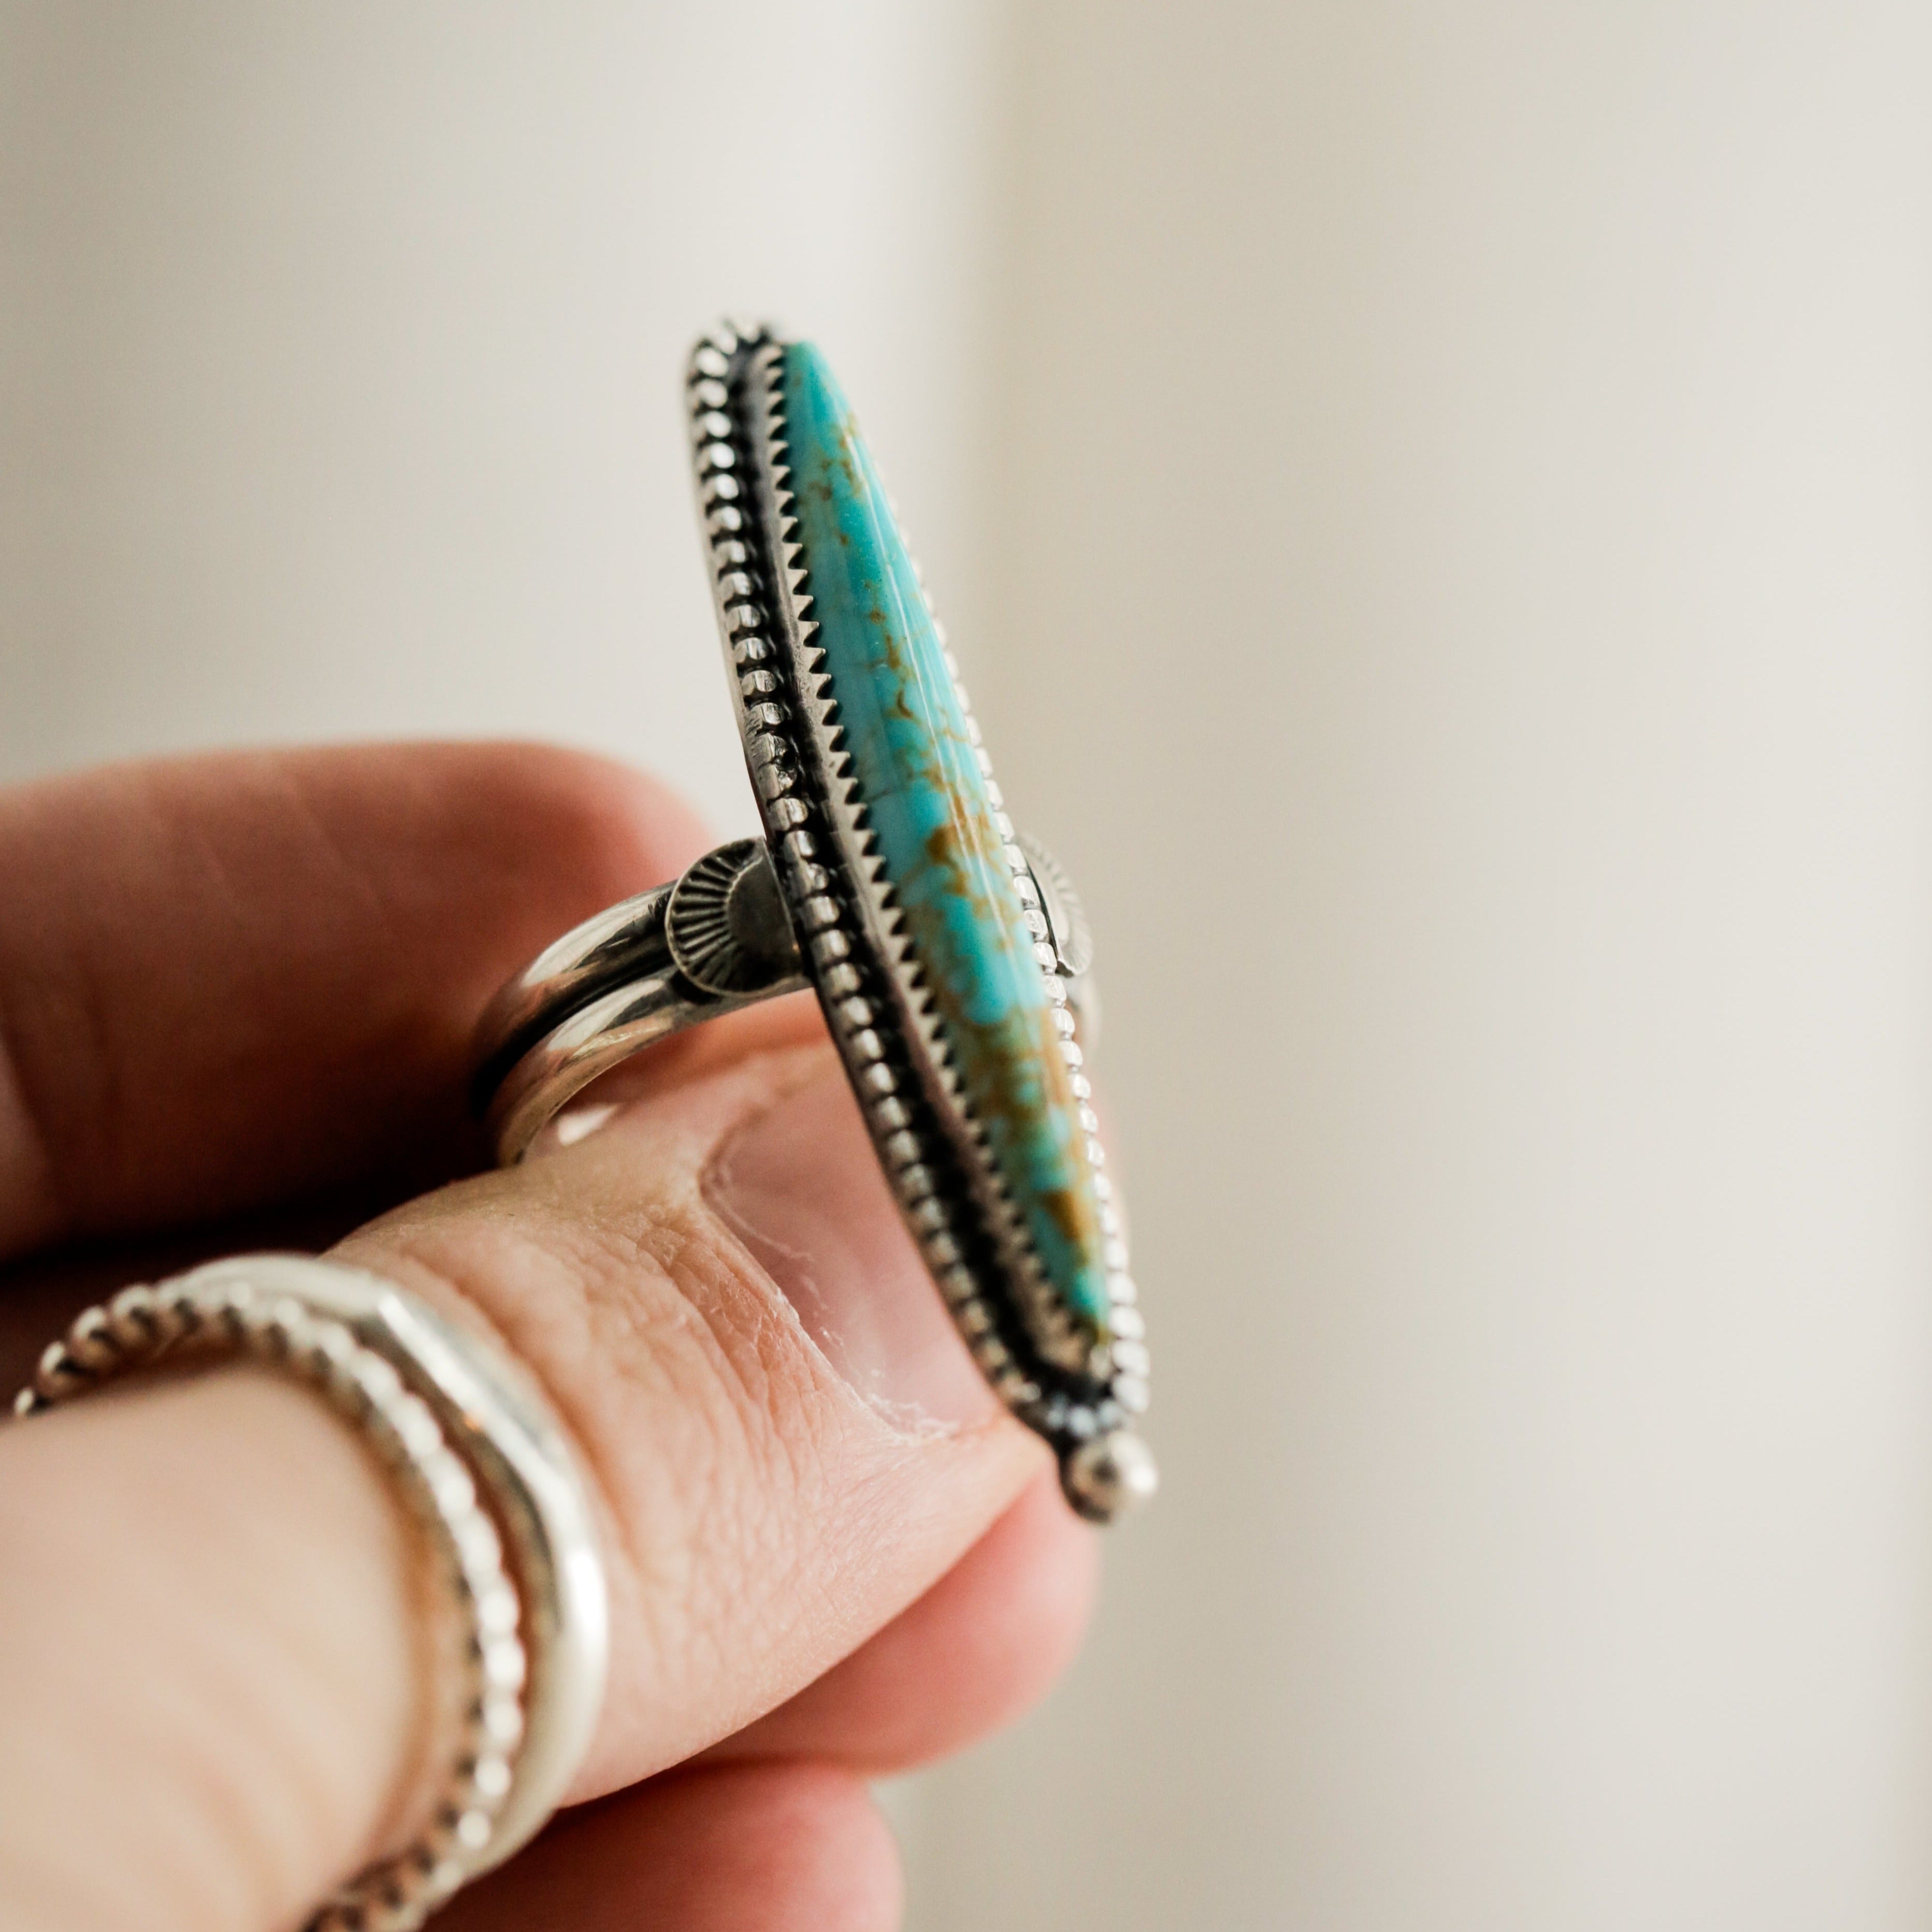 Oblong Turquoise Ring